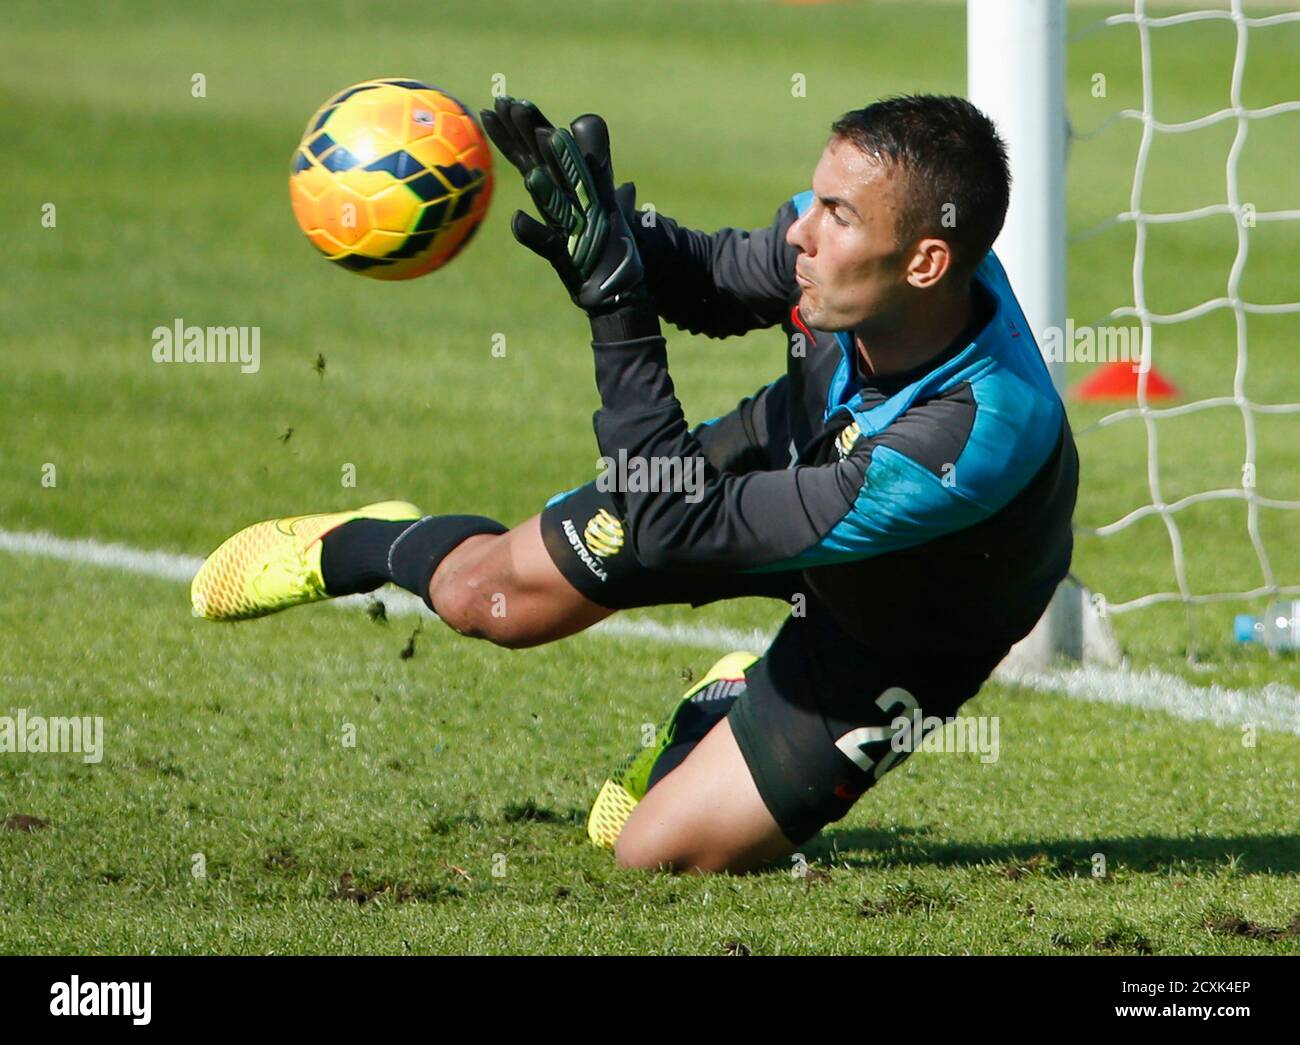 Udlænding ale Tilslutte Australian national soccer team Socceroos goalkeeper Mark Birighitti blocks  the ball during a training session in Sydney May 23, 2014. The 2014 FIFA  World Cup, hosted by Brazil, will begin on June